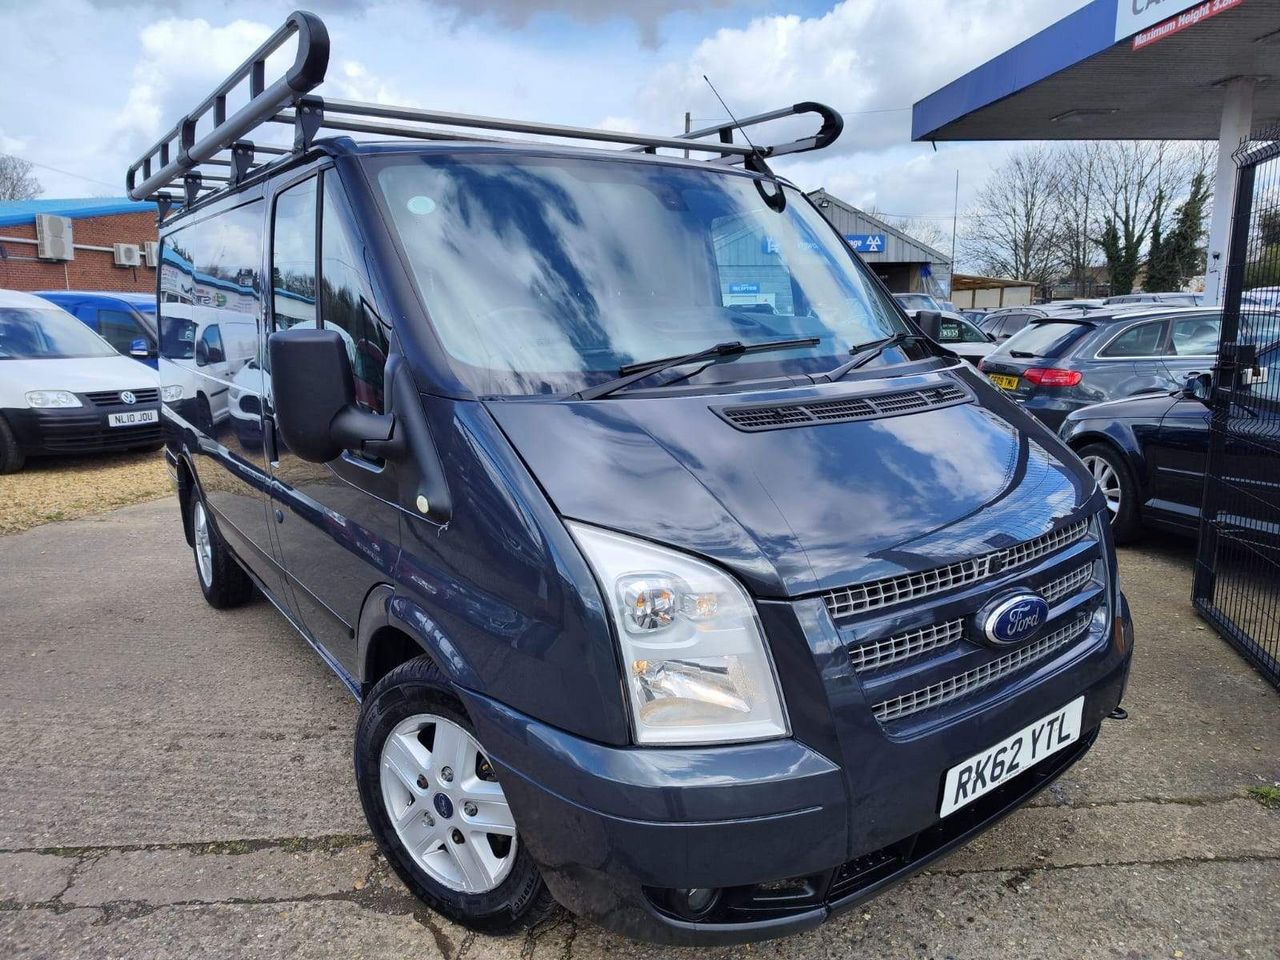 2012 Ford Transit 2.2 TDCi 280 Limited FWD L1 H1 5dr - Picture 13 of 34